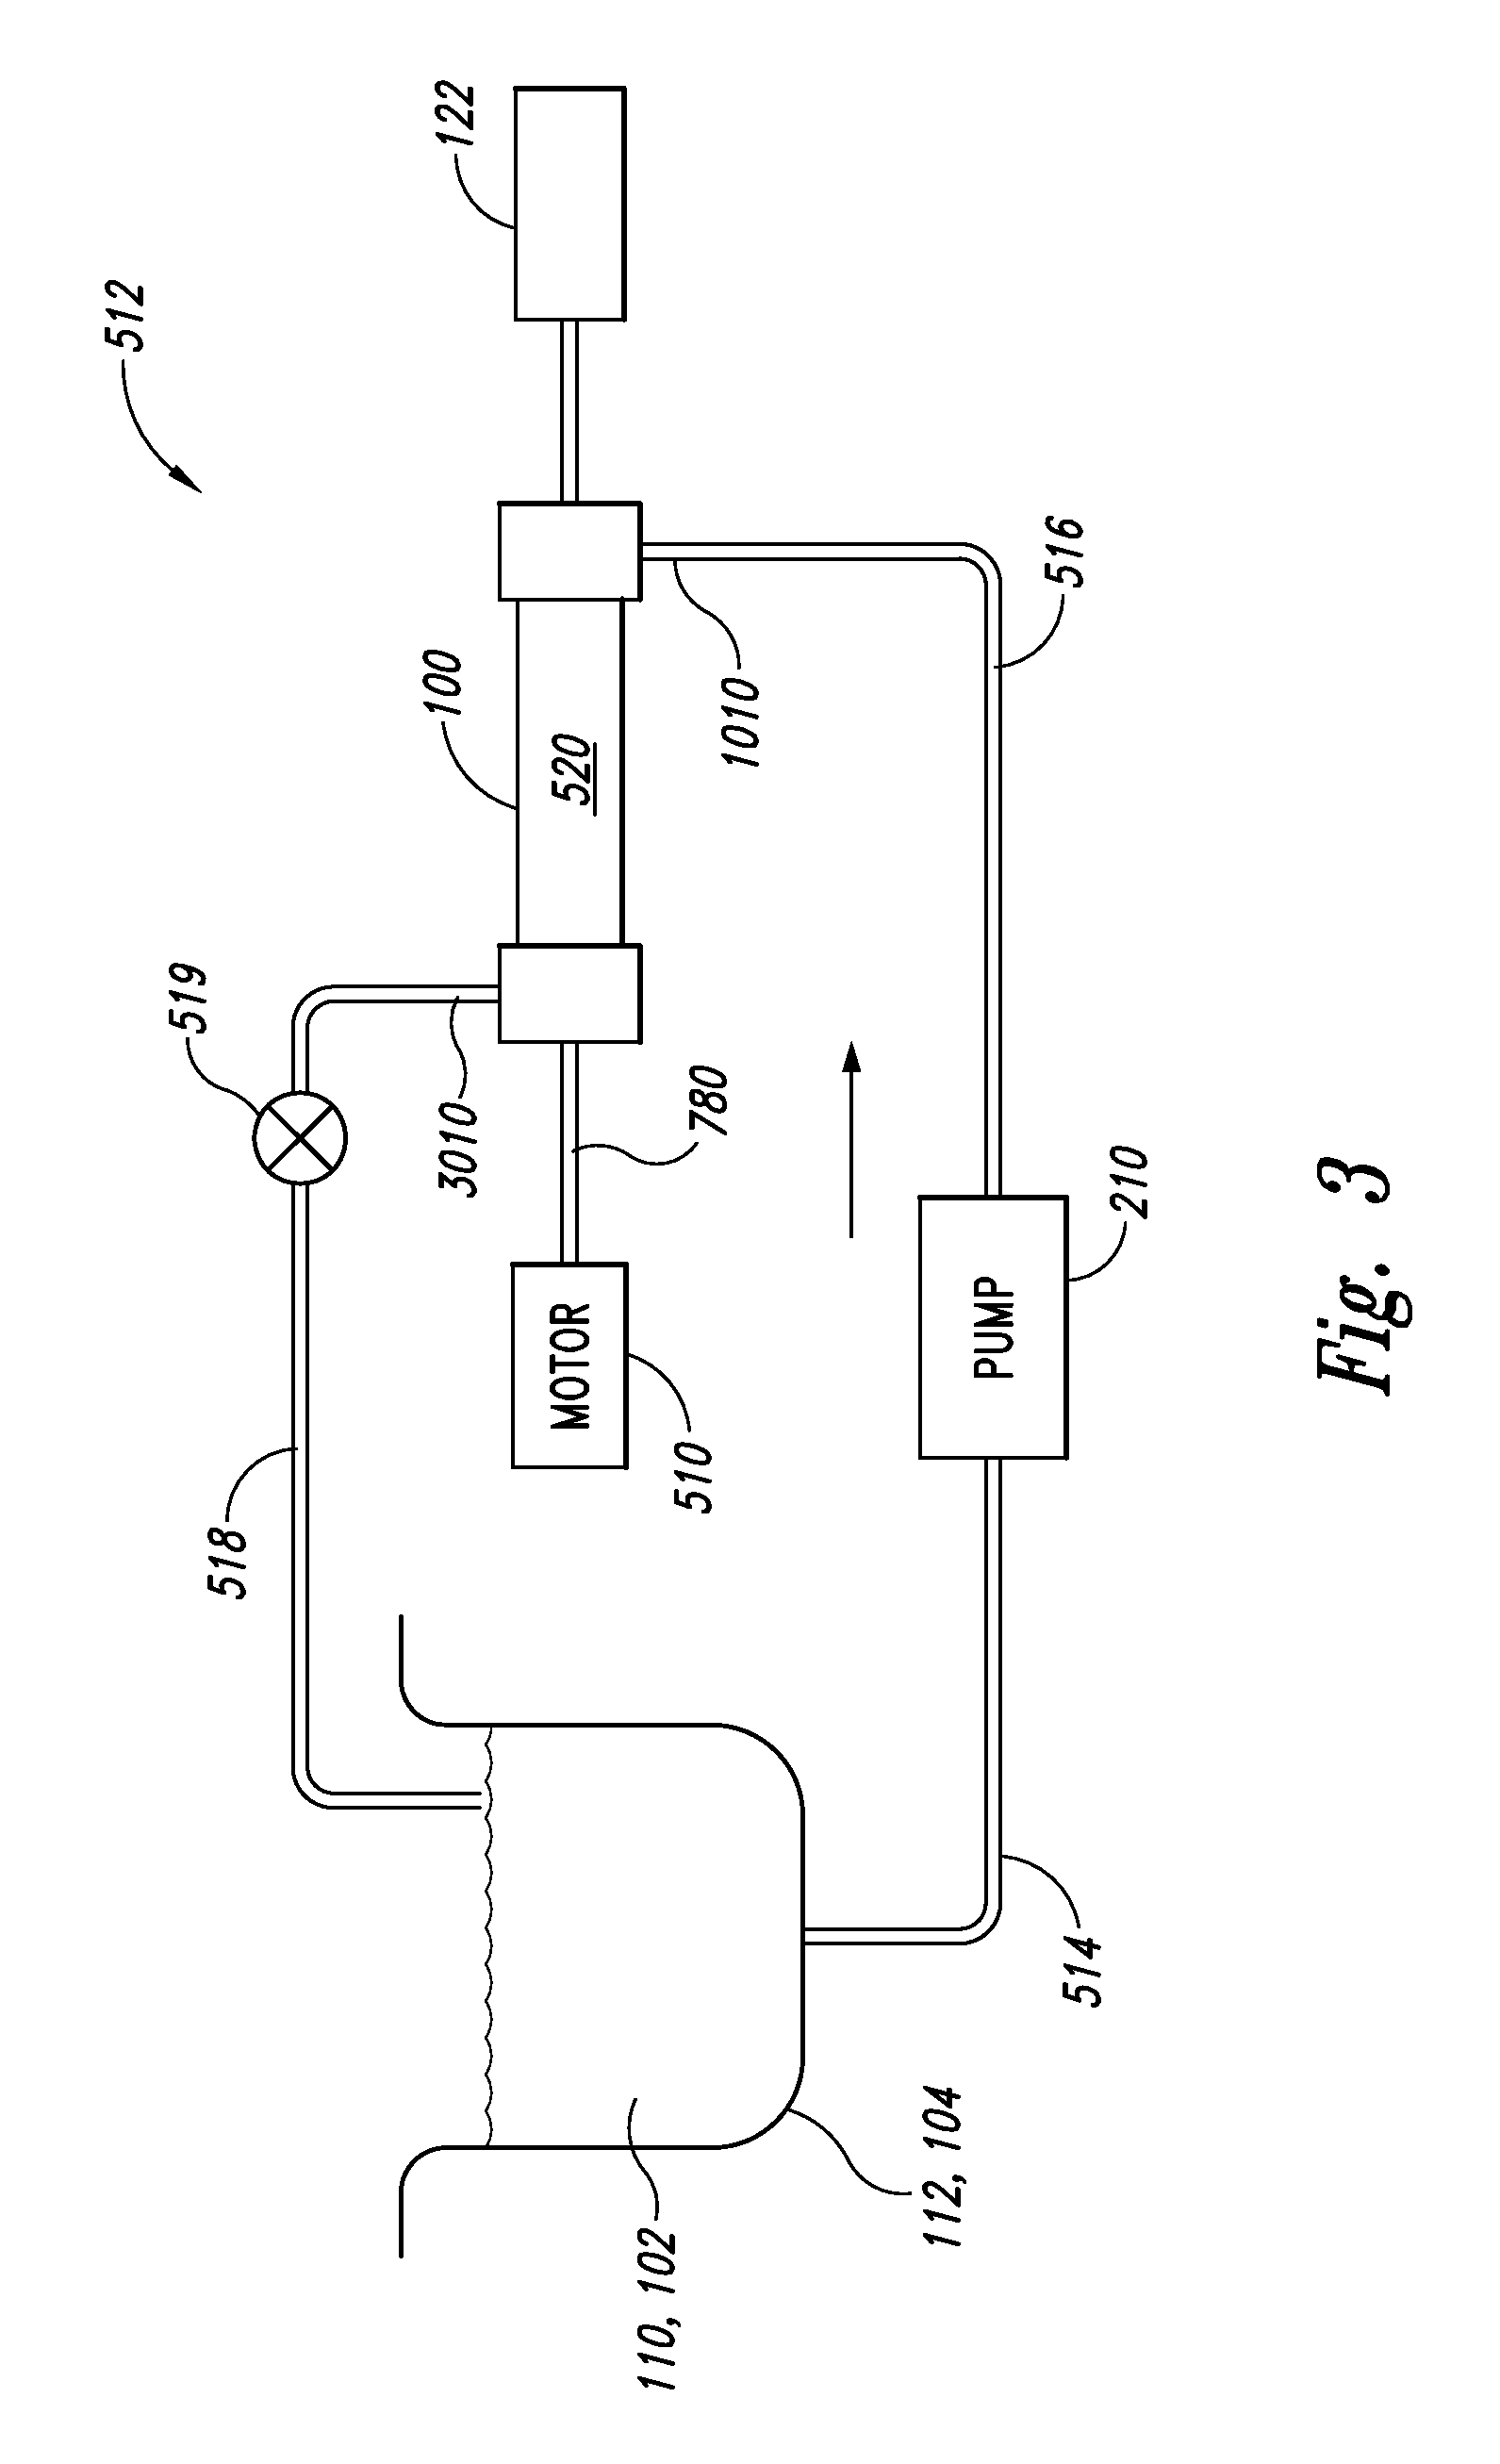 Bacteriostatic or bacteriocidal compositions and methods